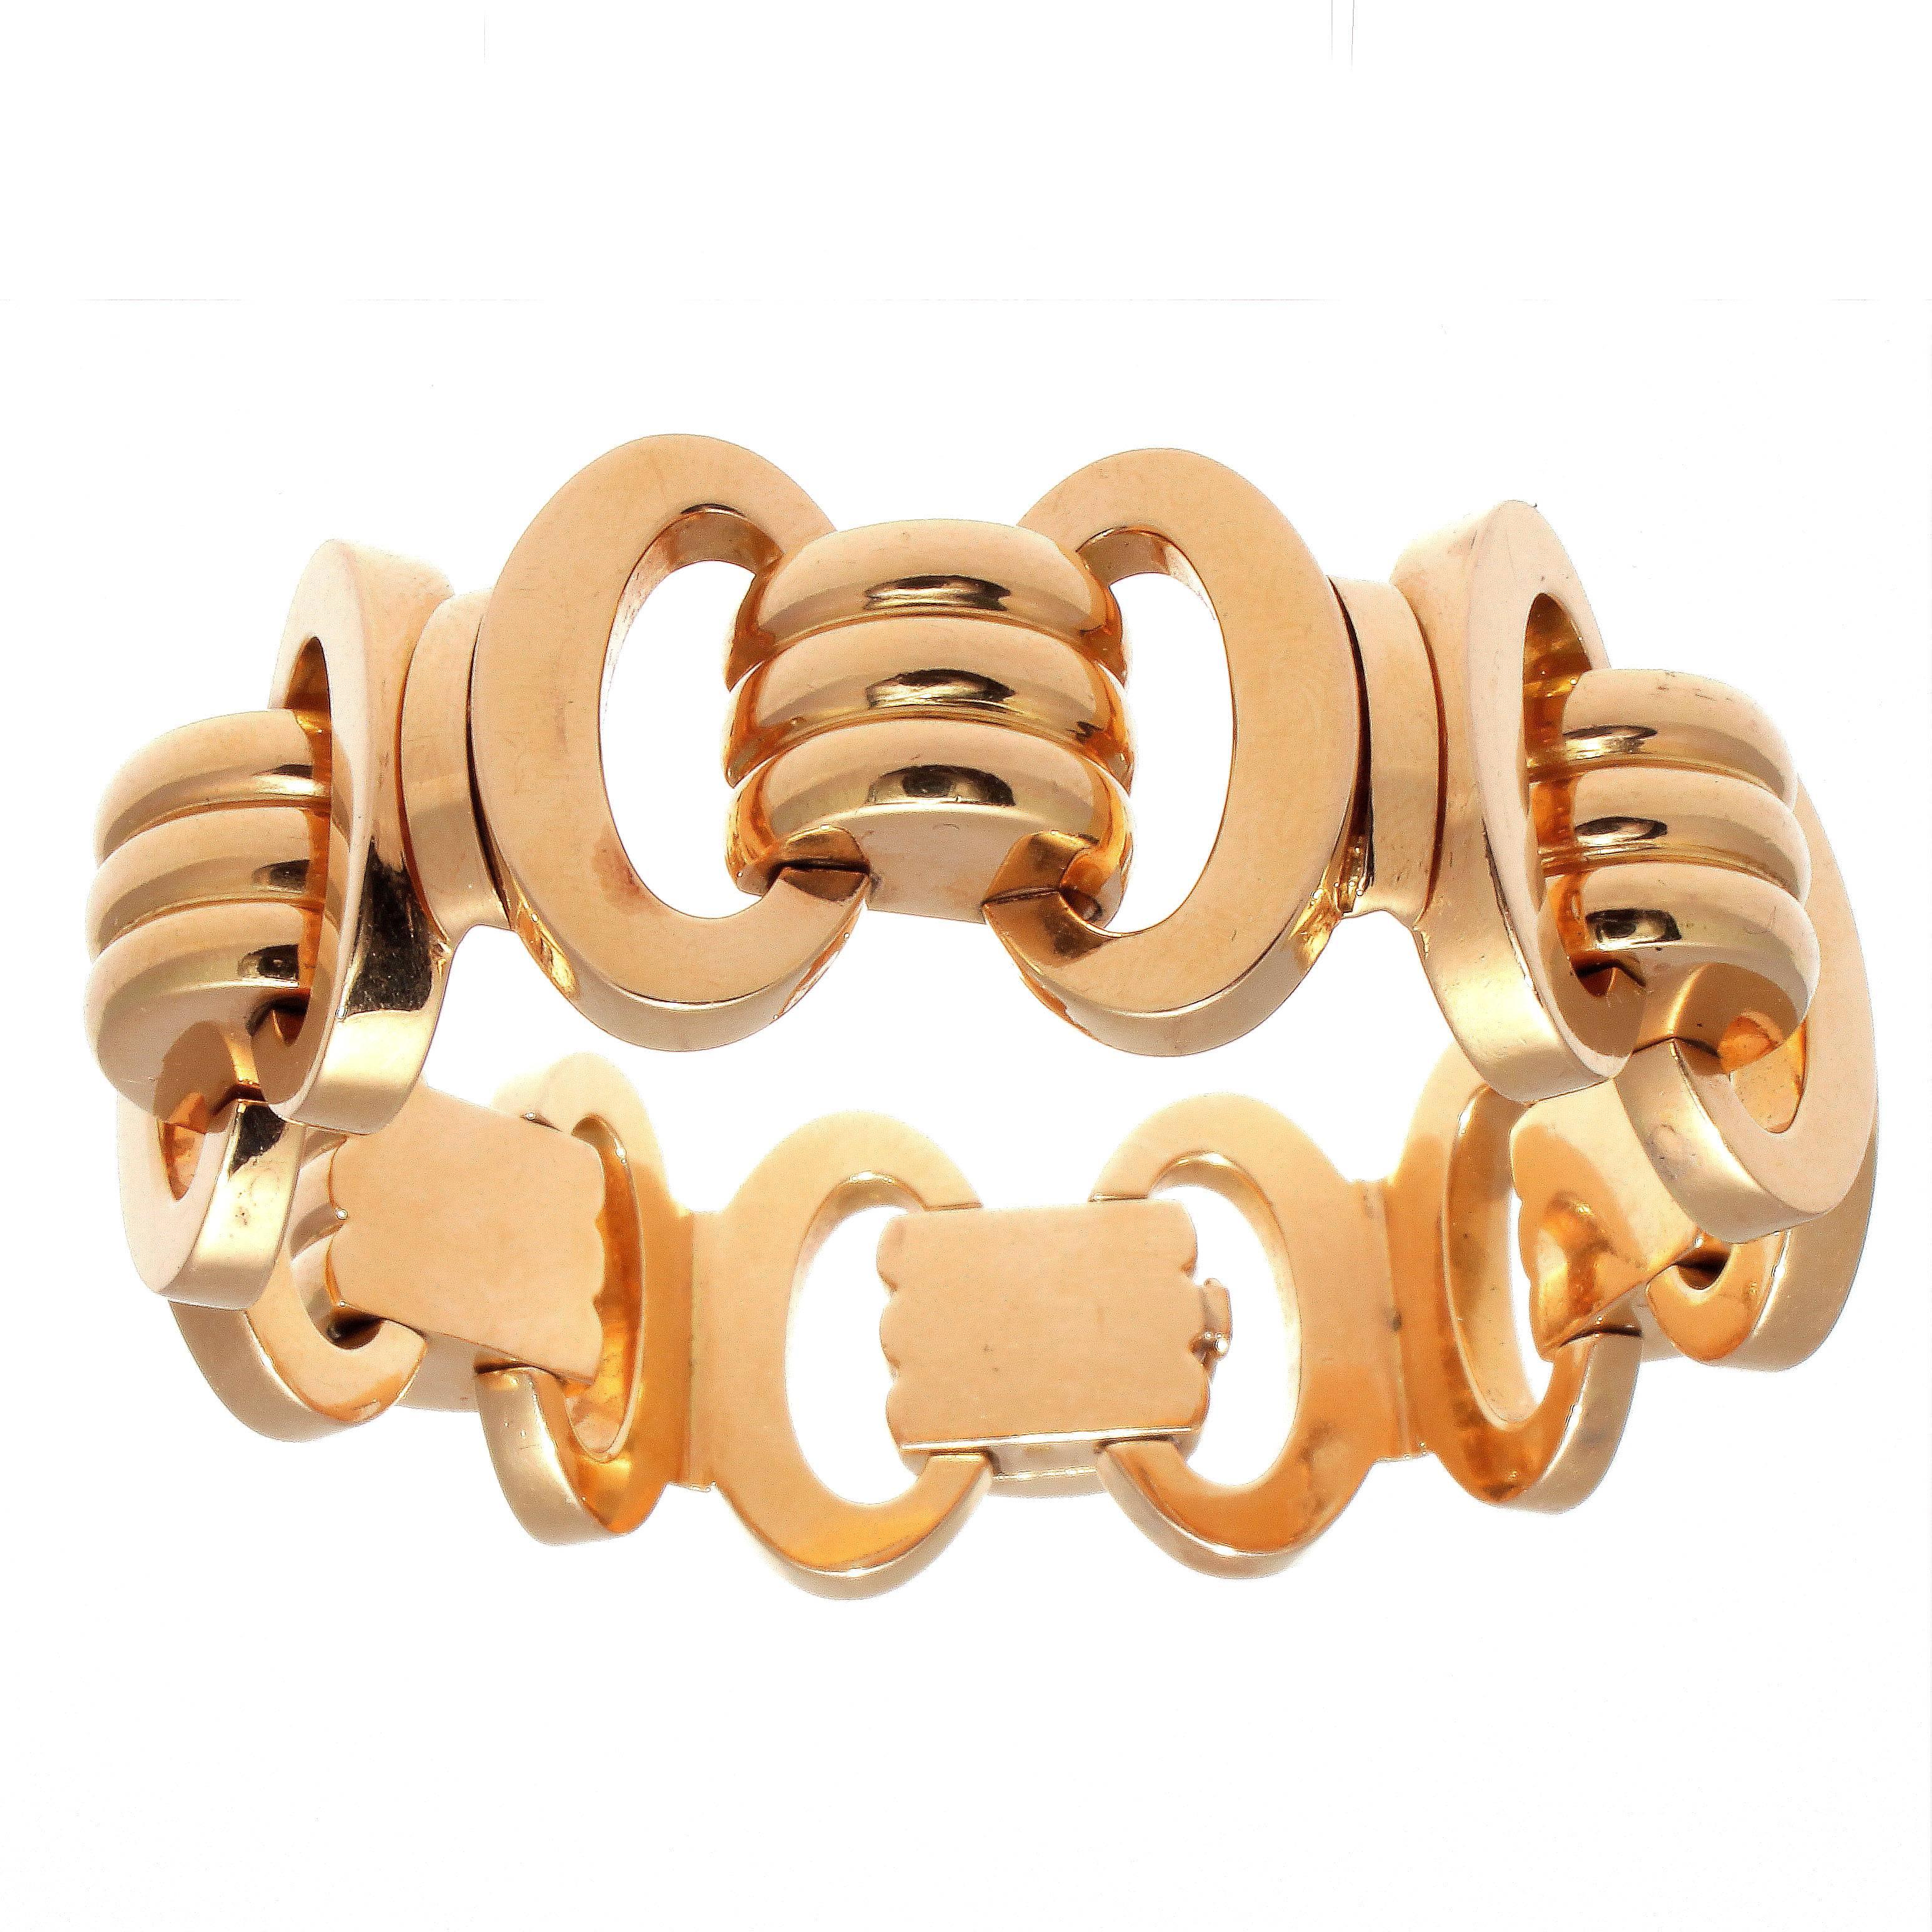 Effortless fashion has been part of French culture  and is a constant in their creativity. Exemplified by the retro style which has come full circle and is popular once again today. The bracelet is hand crafted in brightly glistening 18k gold.